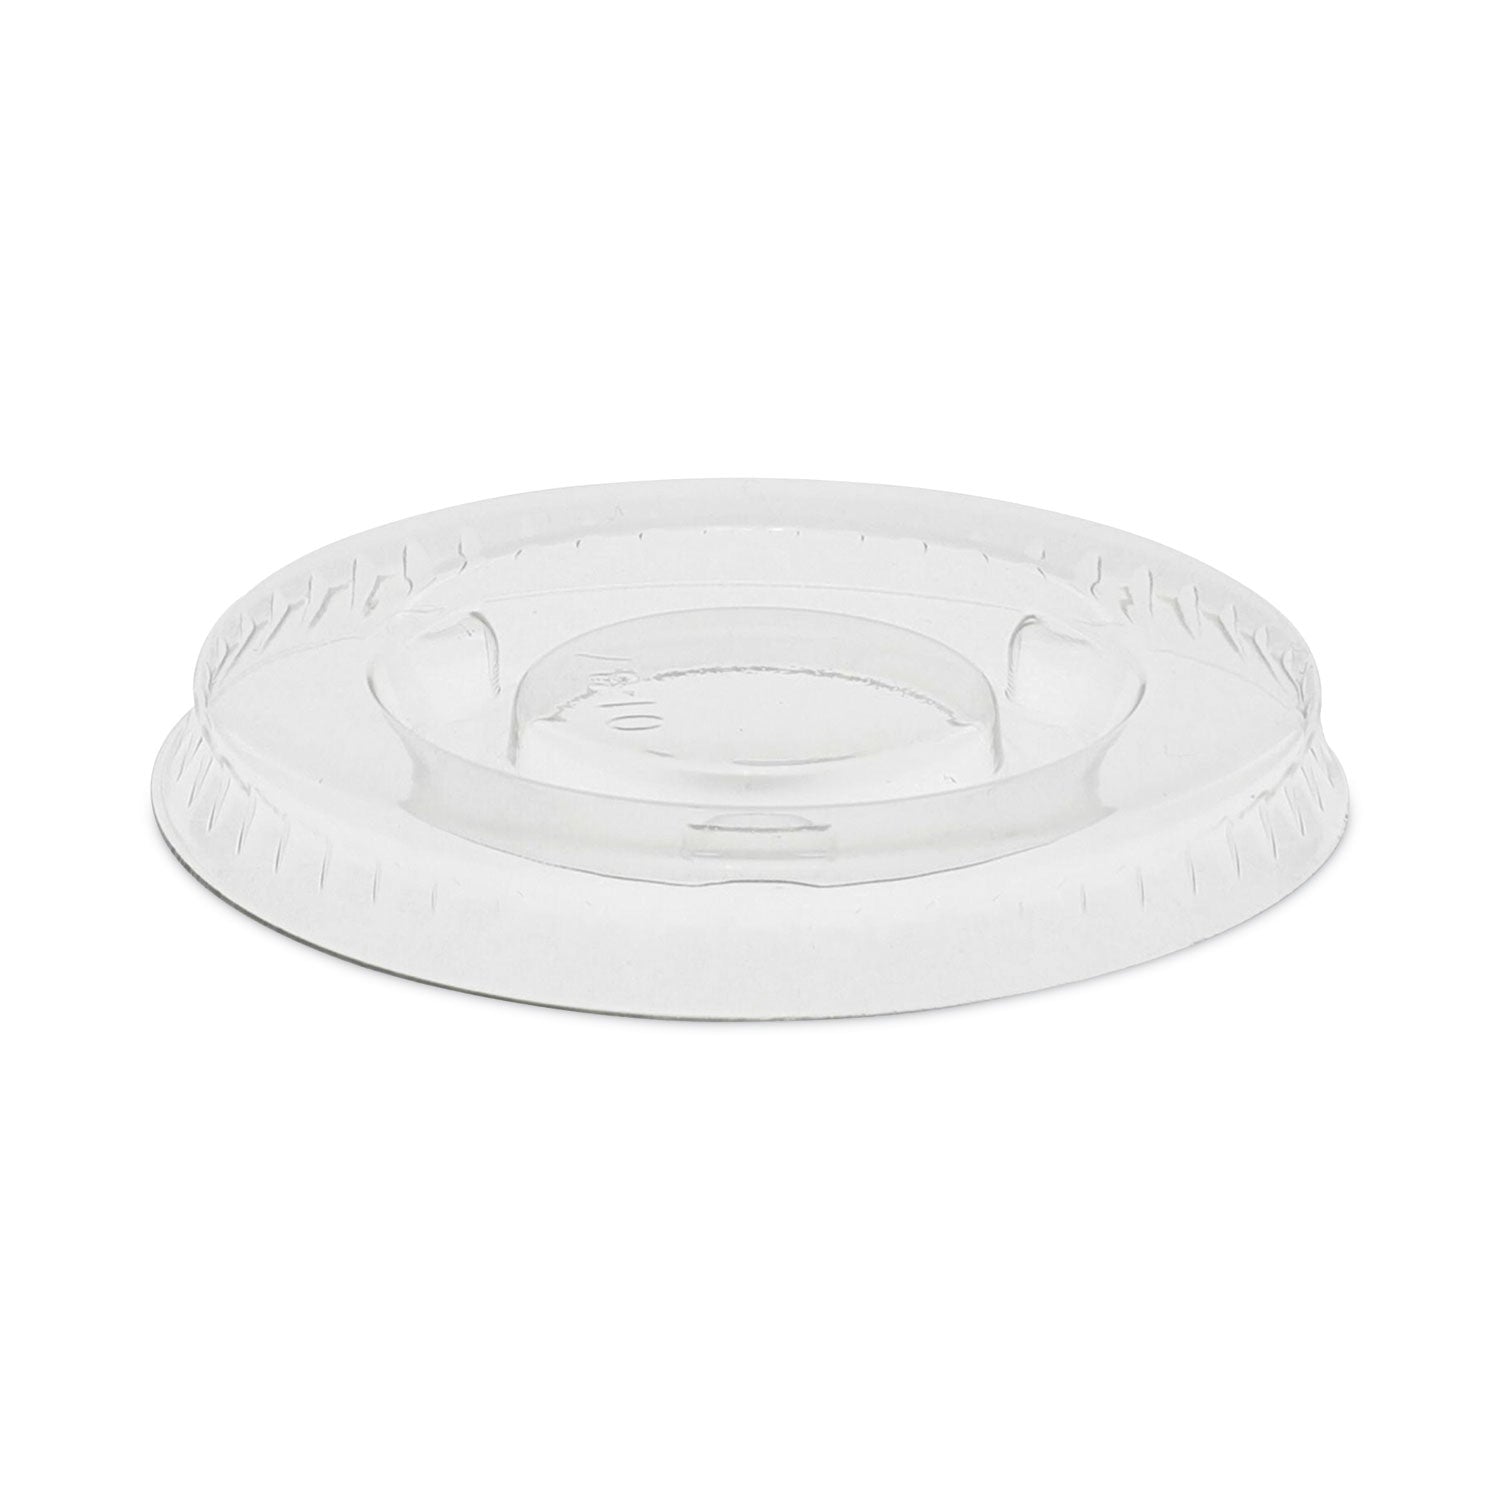 plastic-portion-cup-lid-fits-05-oz-to-1-oz-cups-clear-100-sleeve-25-sleeves-carton_pctyls1fr - 1